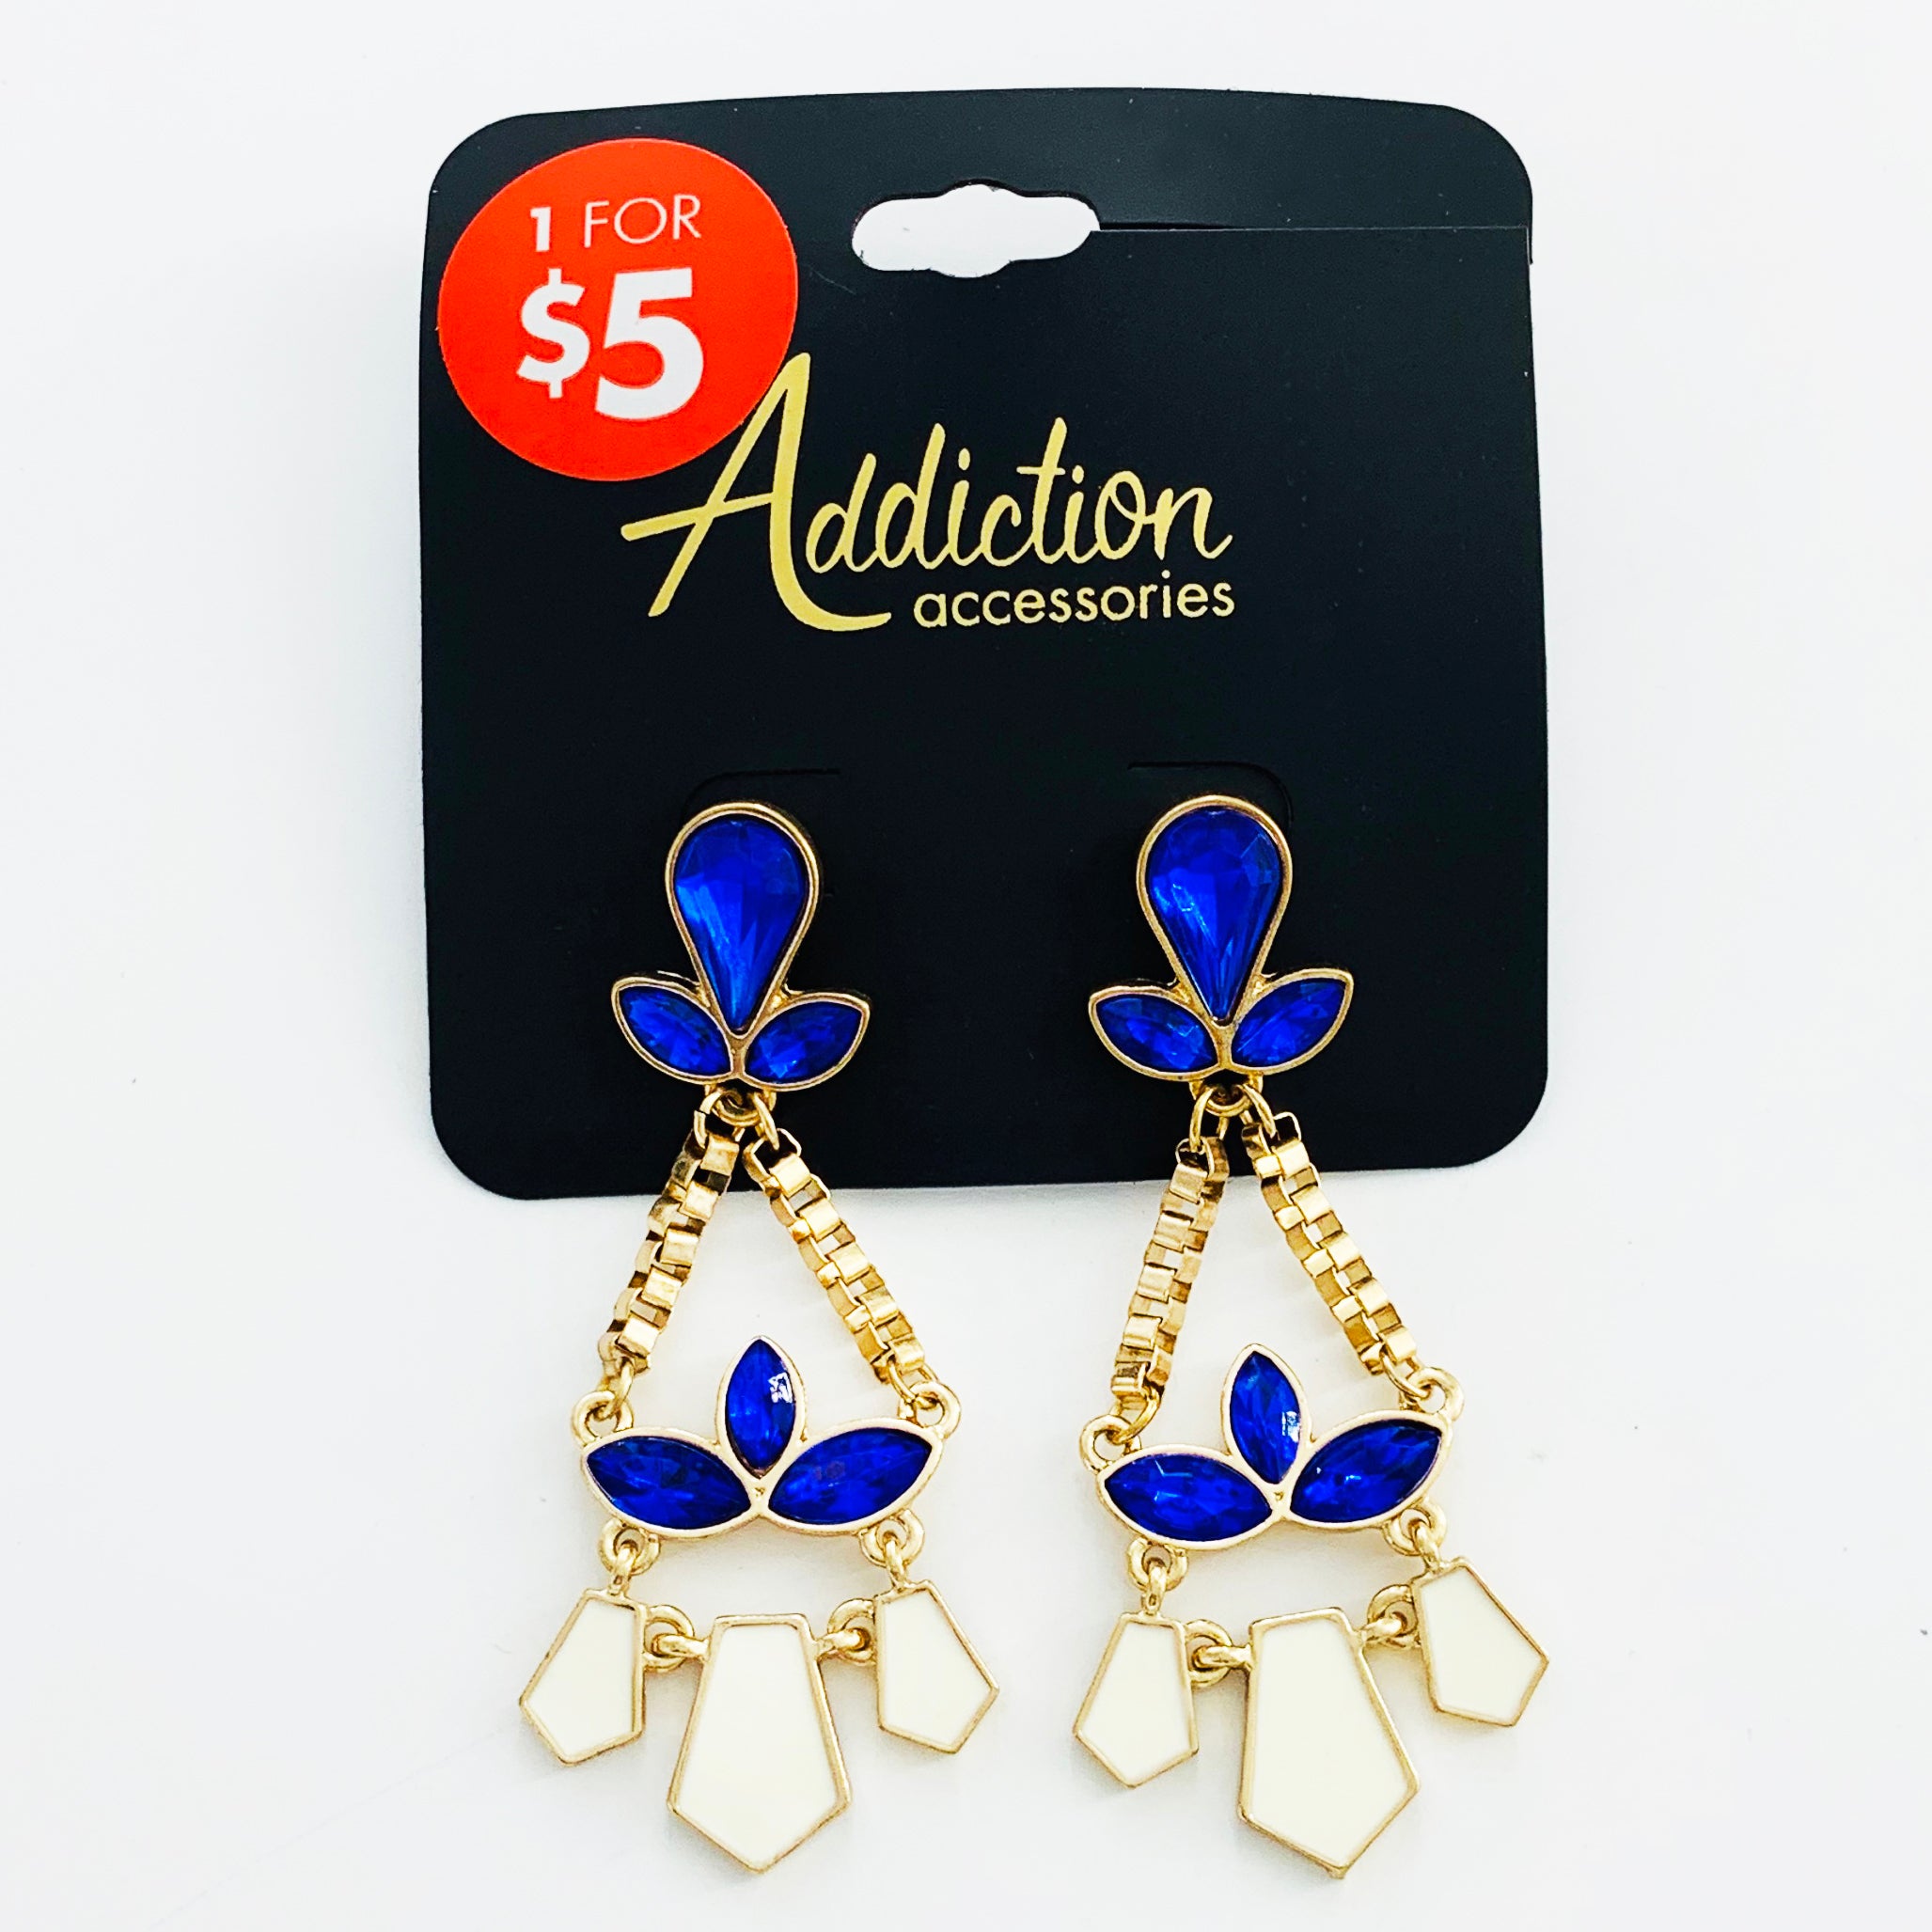 Earrings with blue and white stones